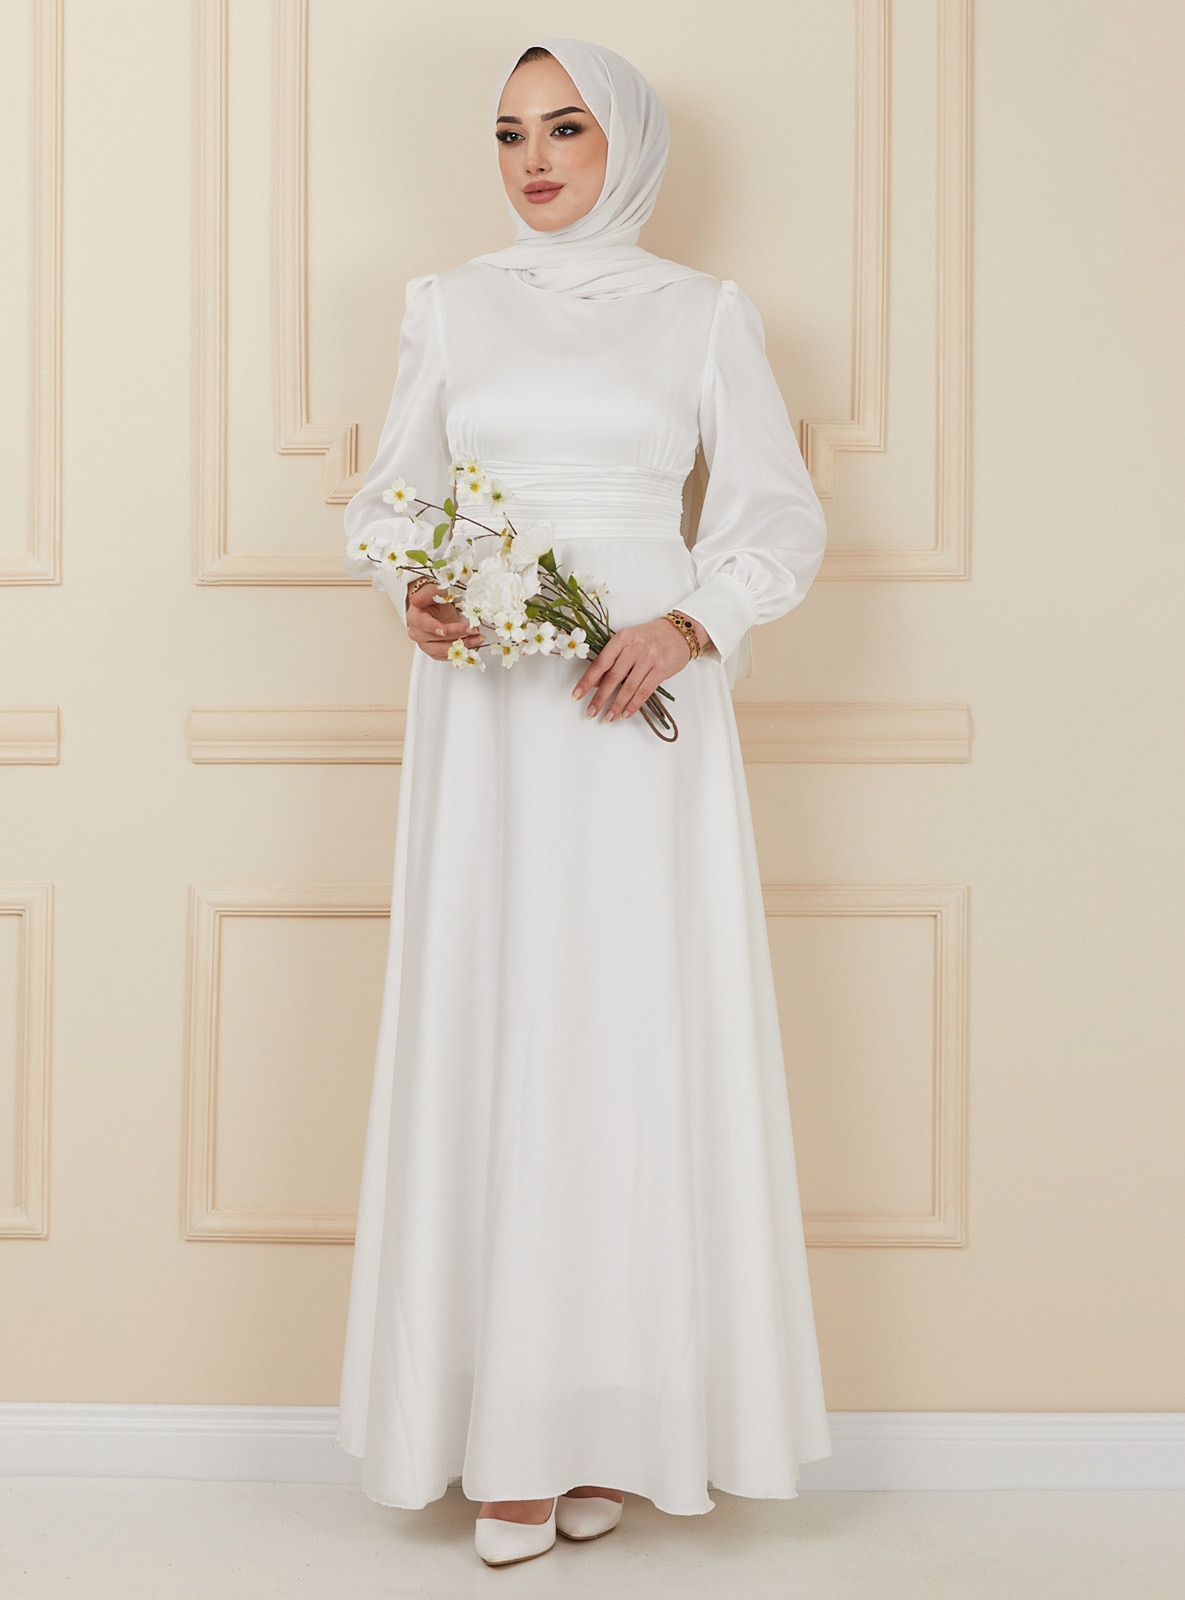 Belt Detailed Satin Nikah Hijab Evening Gowns With Pleated Detail Ecru